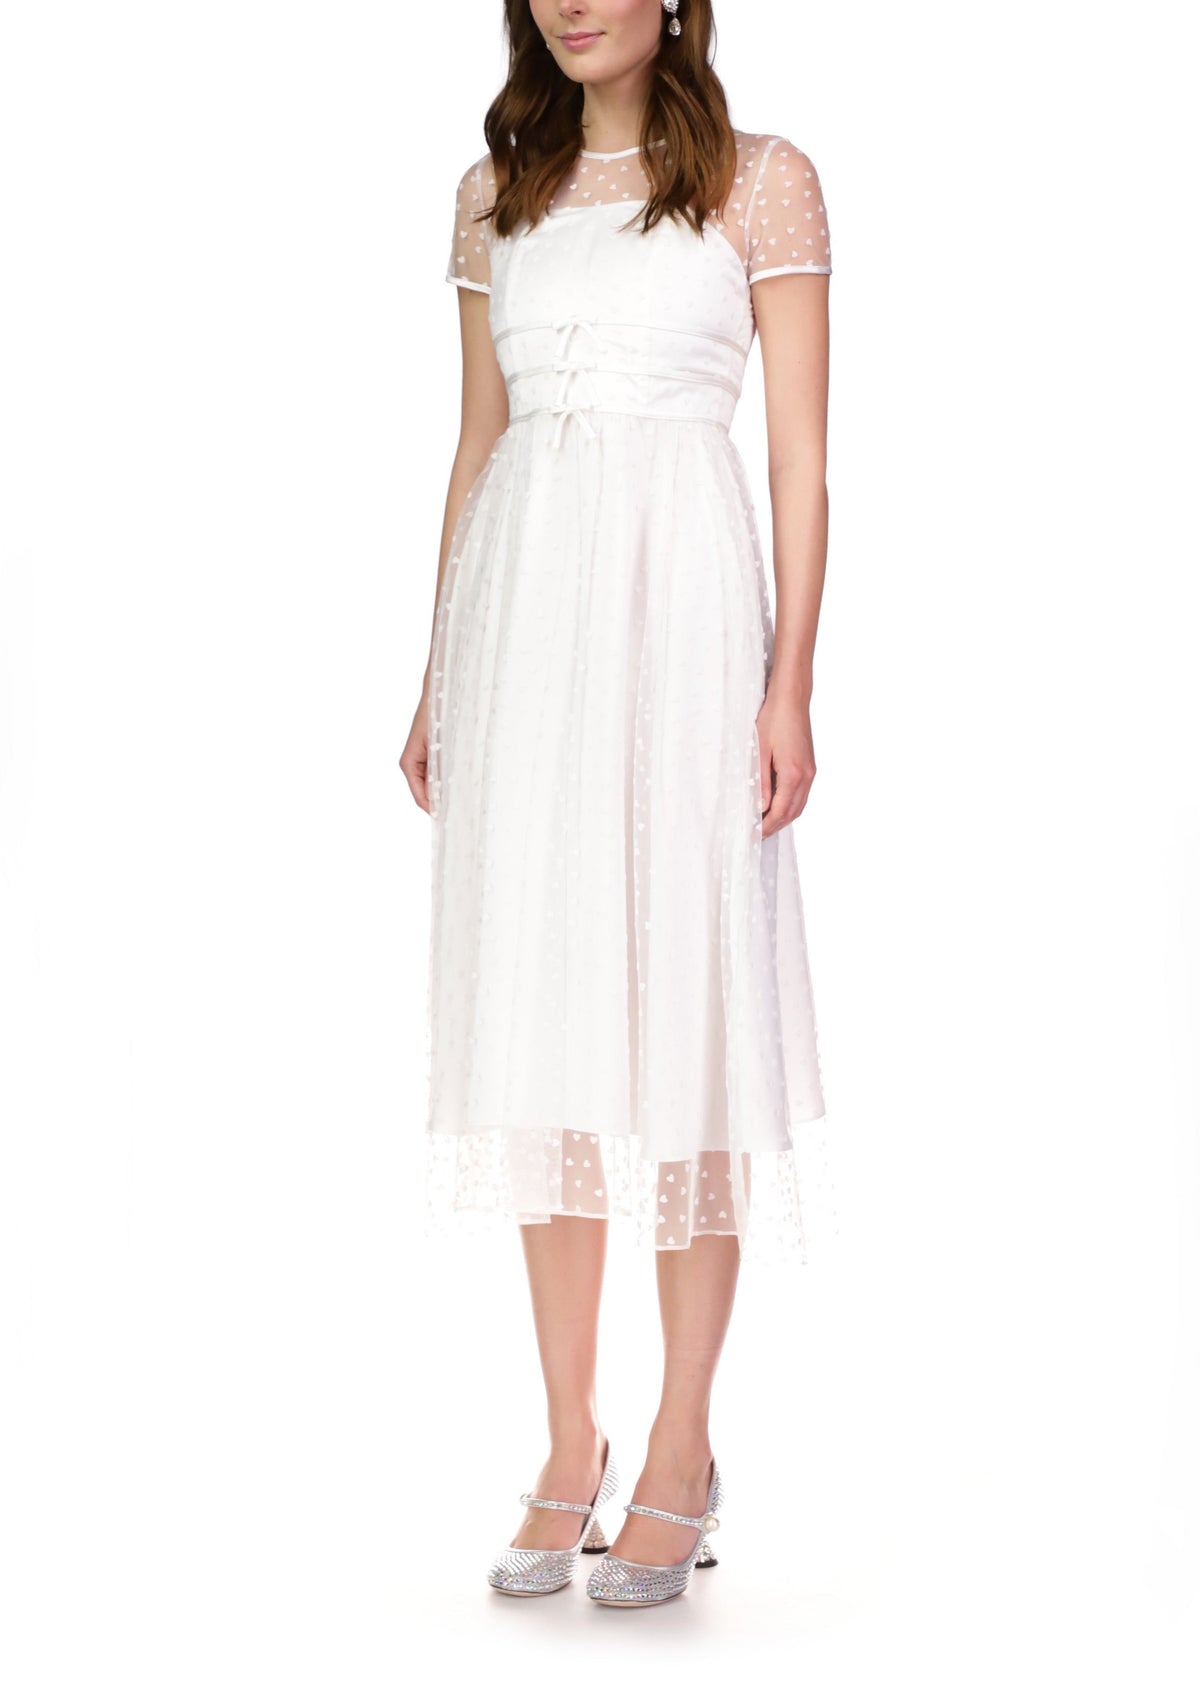 Scarlett Tulle Dress with Bows in White